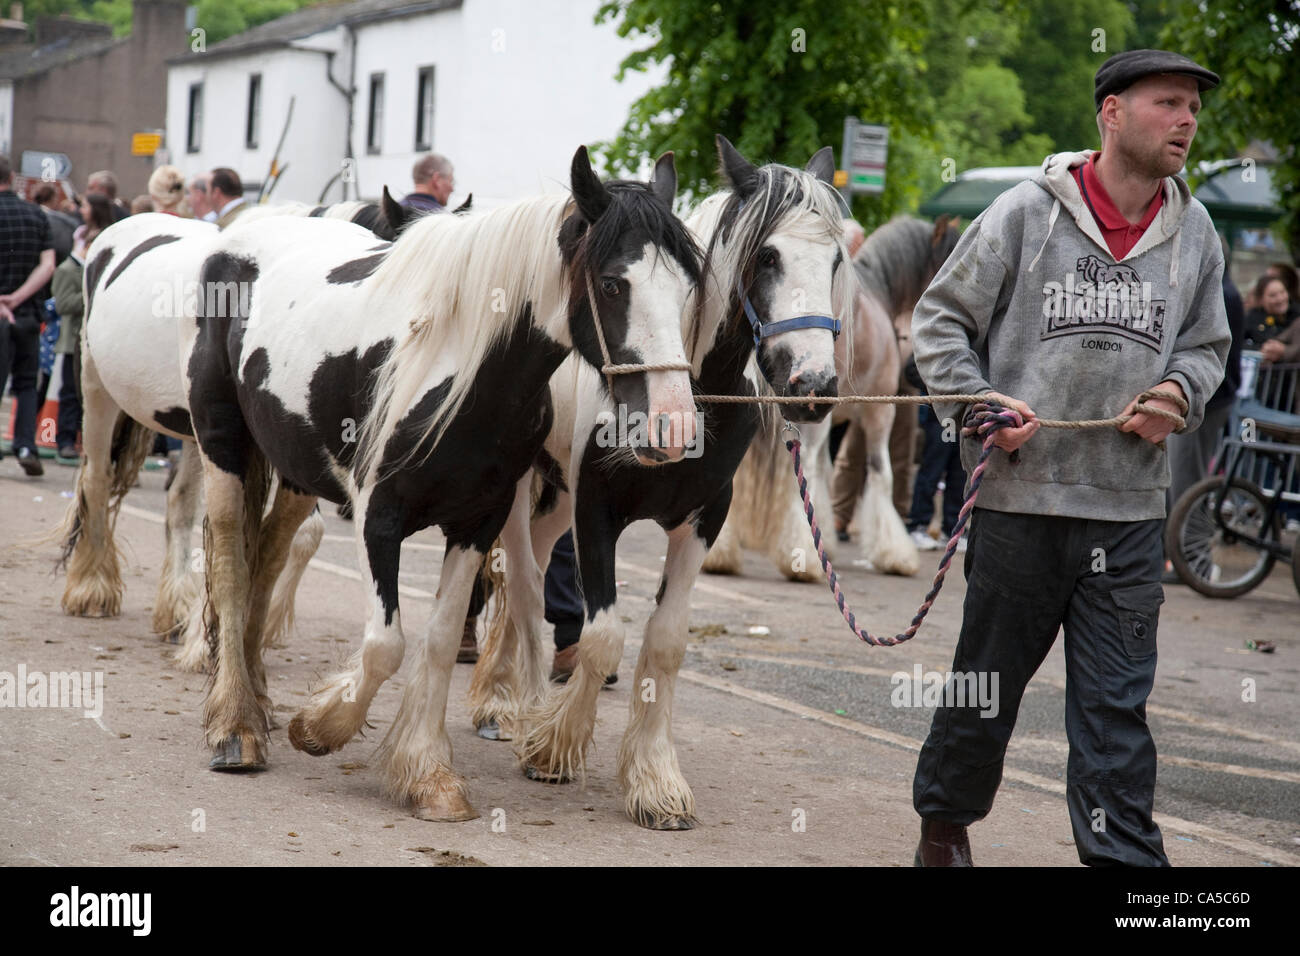 Sunday 10th June 2012 at Appleby, Cumbria, England, UK. A man leads a group of cob horses along the street at Appleby Fair, the biggest annual gathering of Gypsies and Travellers in Europe. Sunday is traditionally a busy day for horse trading and visitor attendance at the fair, which runs 7th-13th J Stock Photo